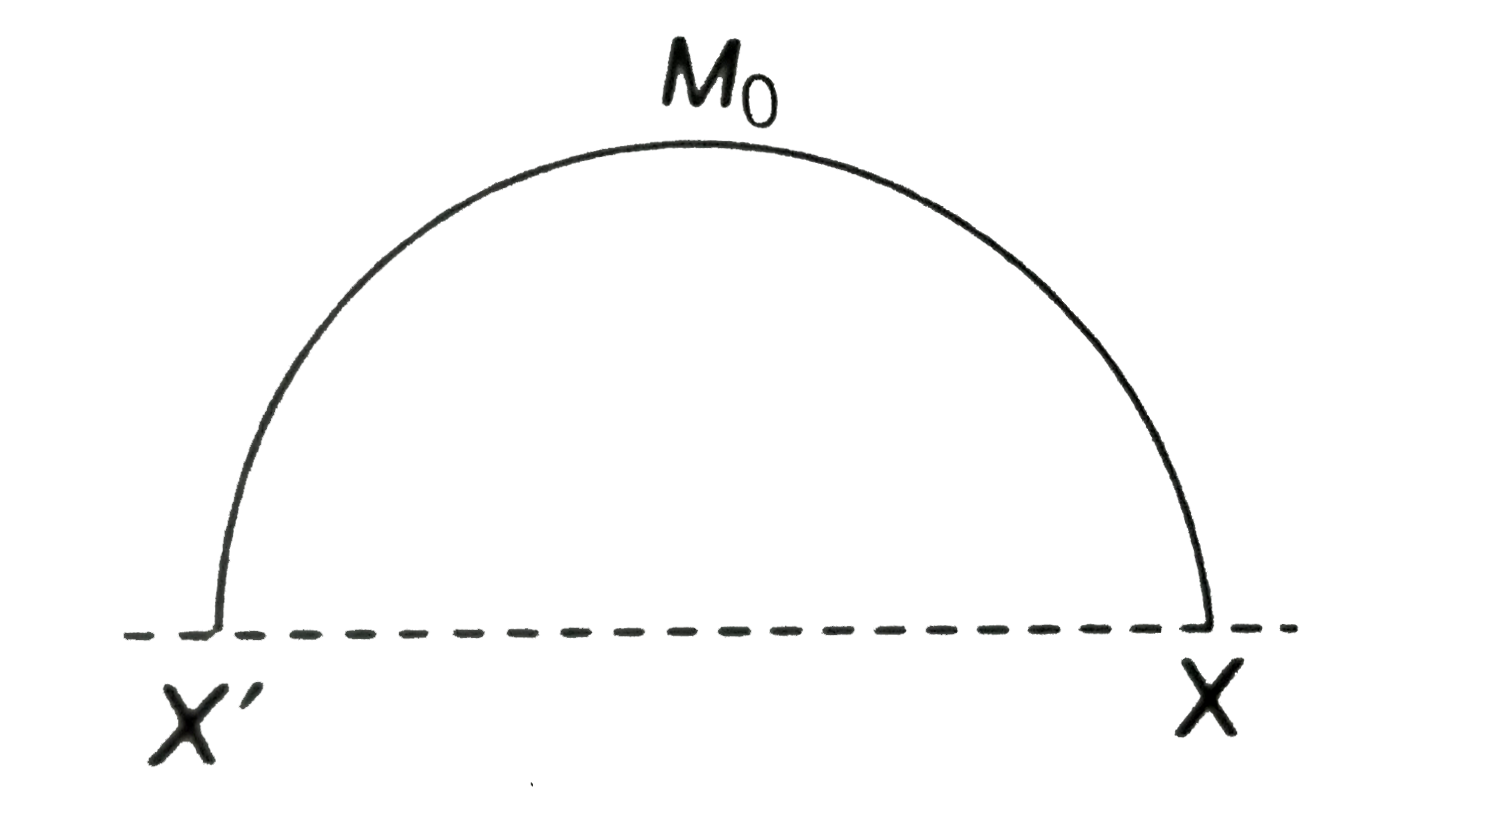 A rod of lengthL and mass M(0) is bent to form a semicircular ring as shown. The M.I. about X'X is